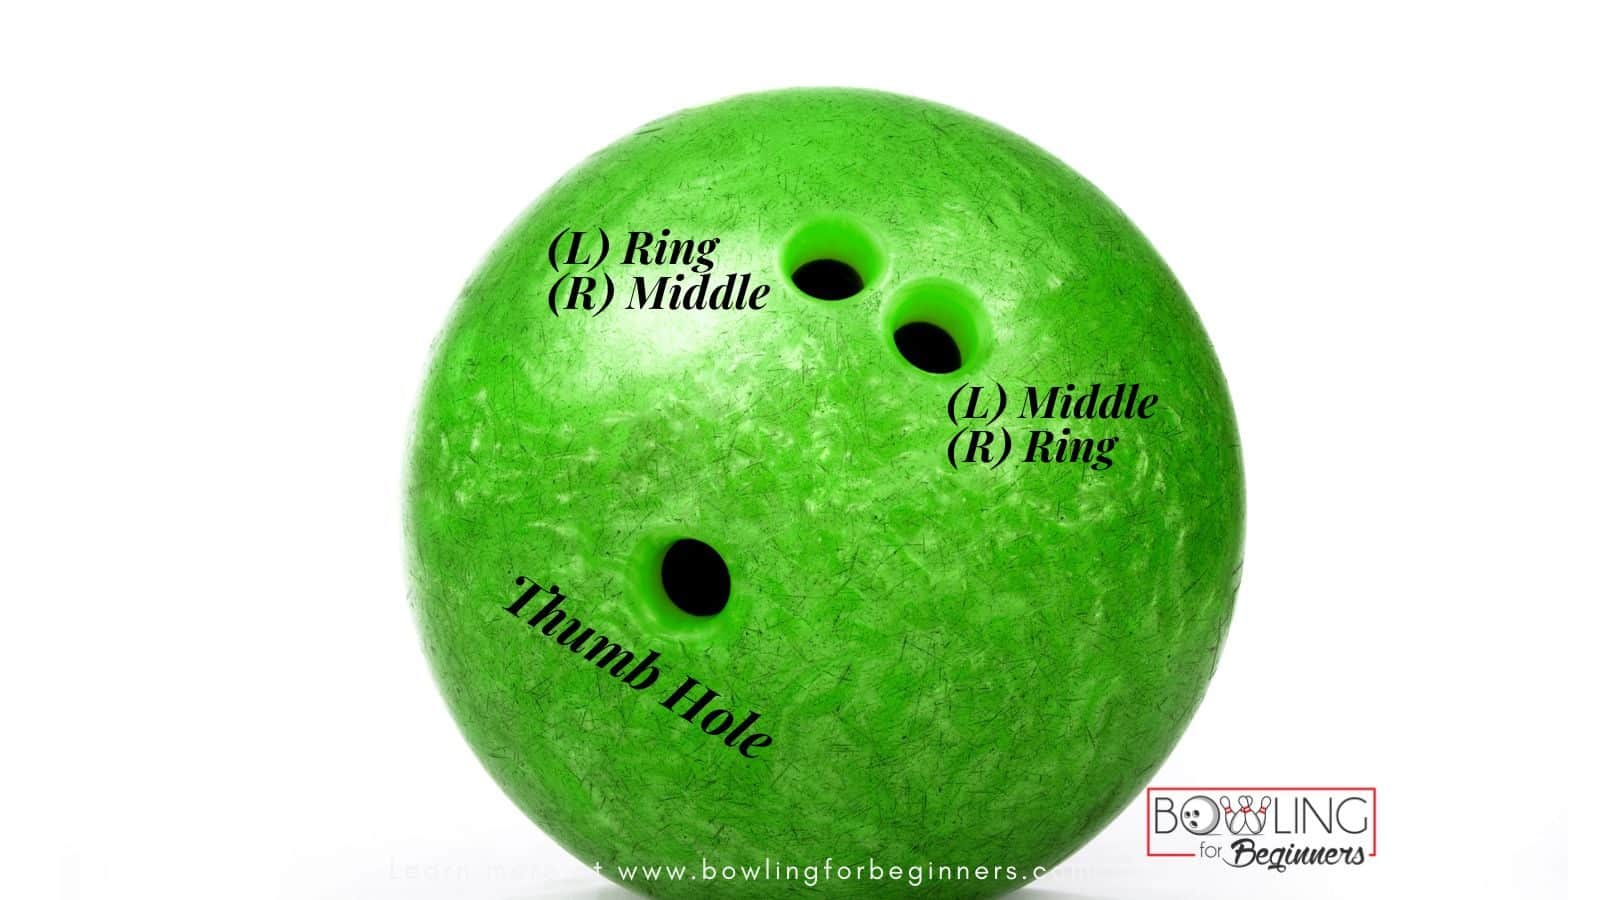 How Many Finger Holes Does A Bowling Ball Have?